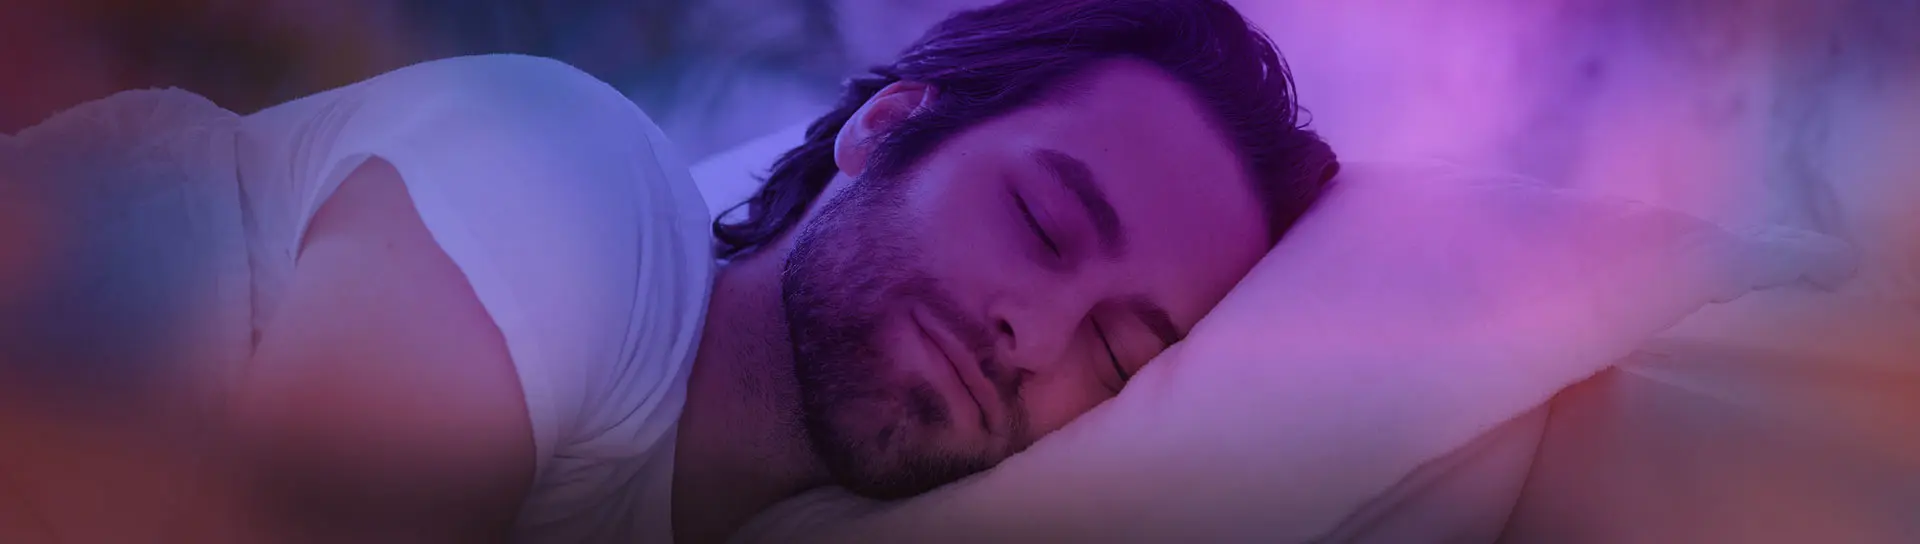 Peaceful bearded young man sleeping in bed alone.